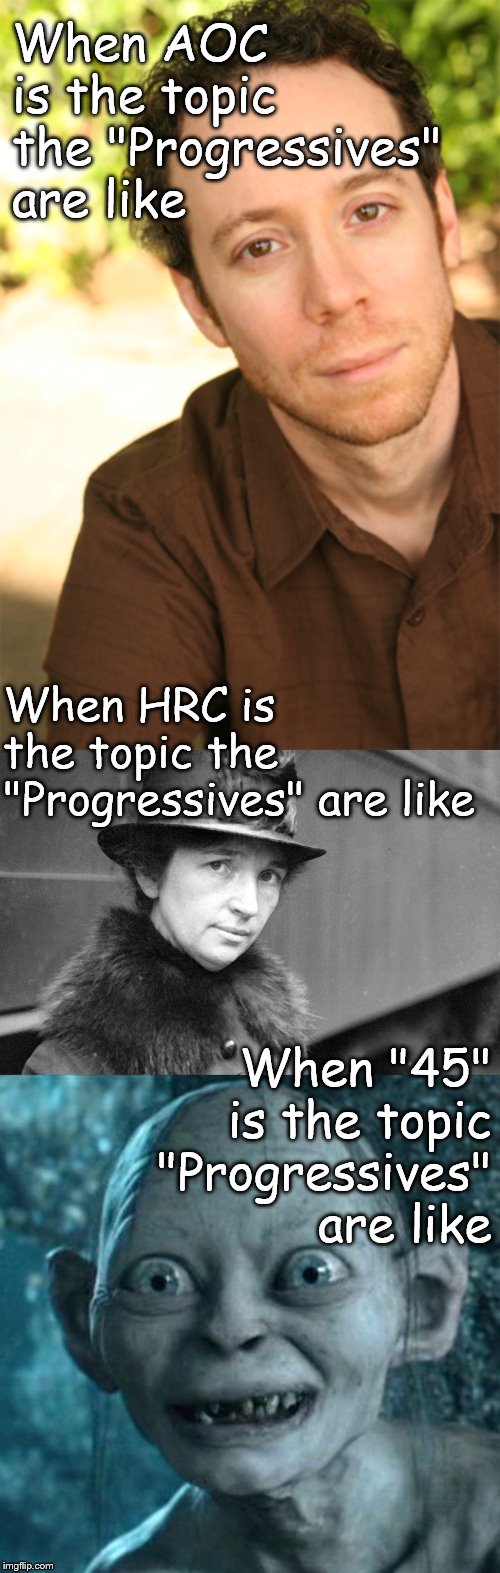 Sorry, Stuart, but I couldn't resist your soulful, sensitive look when I thought of AOC & how cruelly she's being treated.   | When AOC is the topic the "Progressives" are like; When HRC is the topic the "Progressives" are like; When "45" is the topic "Progressives" are like | image tagged in gollum,margaret sanger 1917,stuart bloom big bang,alexandria ocasio-cortez,progressives,douglie | made w/ Imgflip meme maker